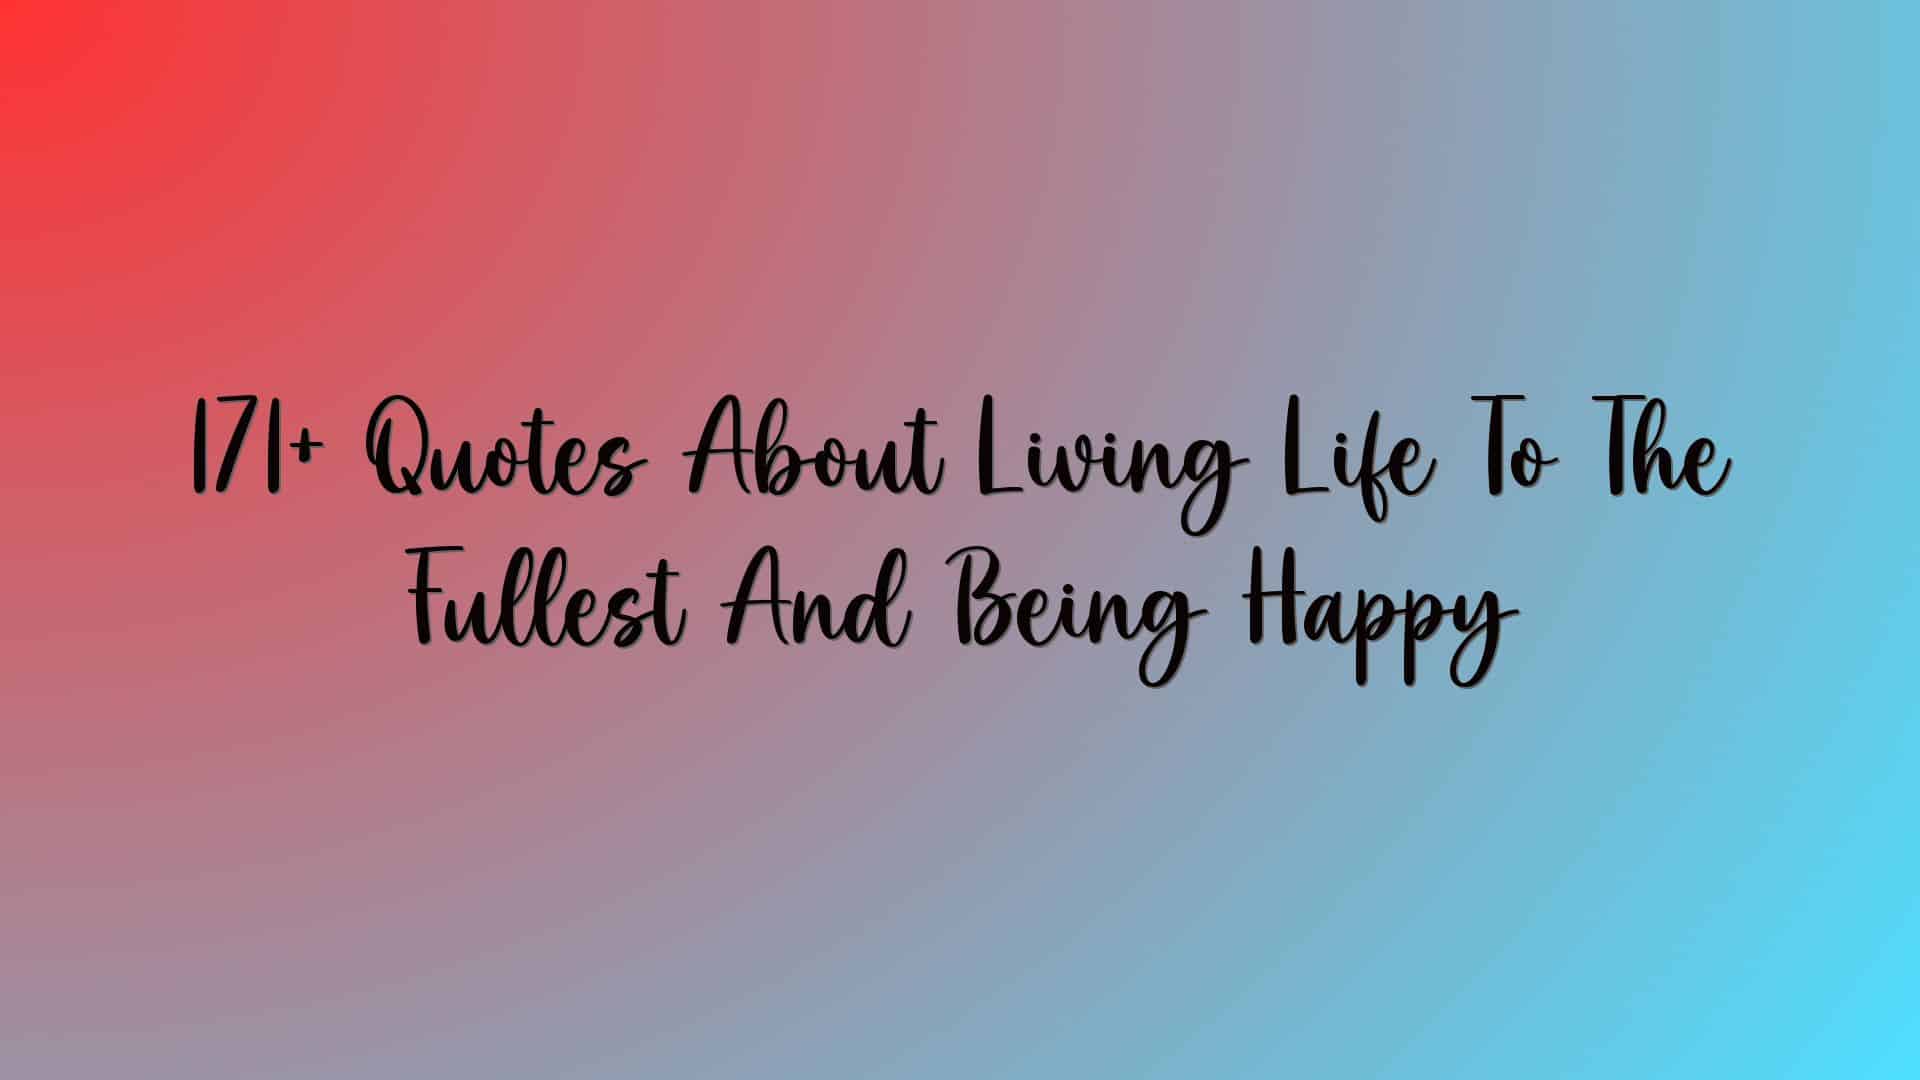 171+ Quotes About Living Life To The Fullest And Being Happy